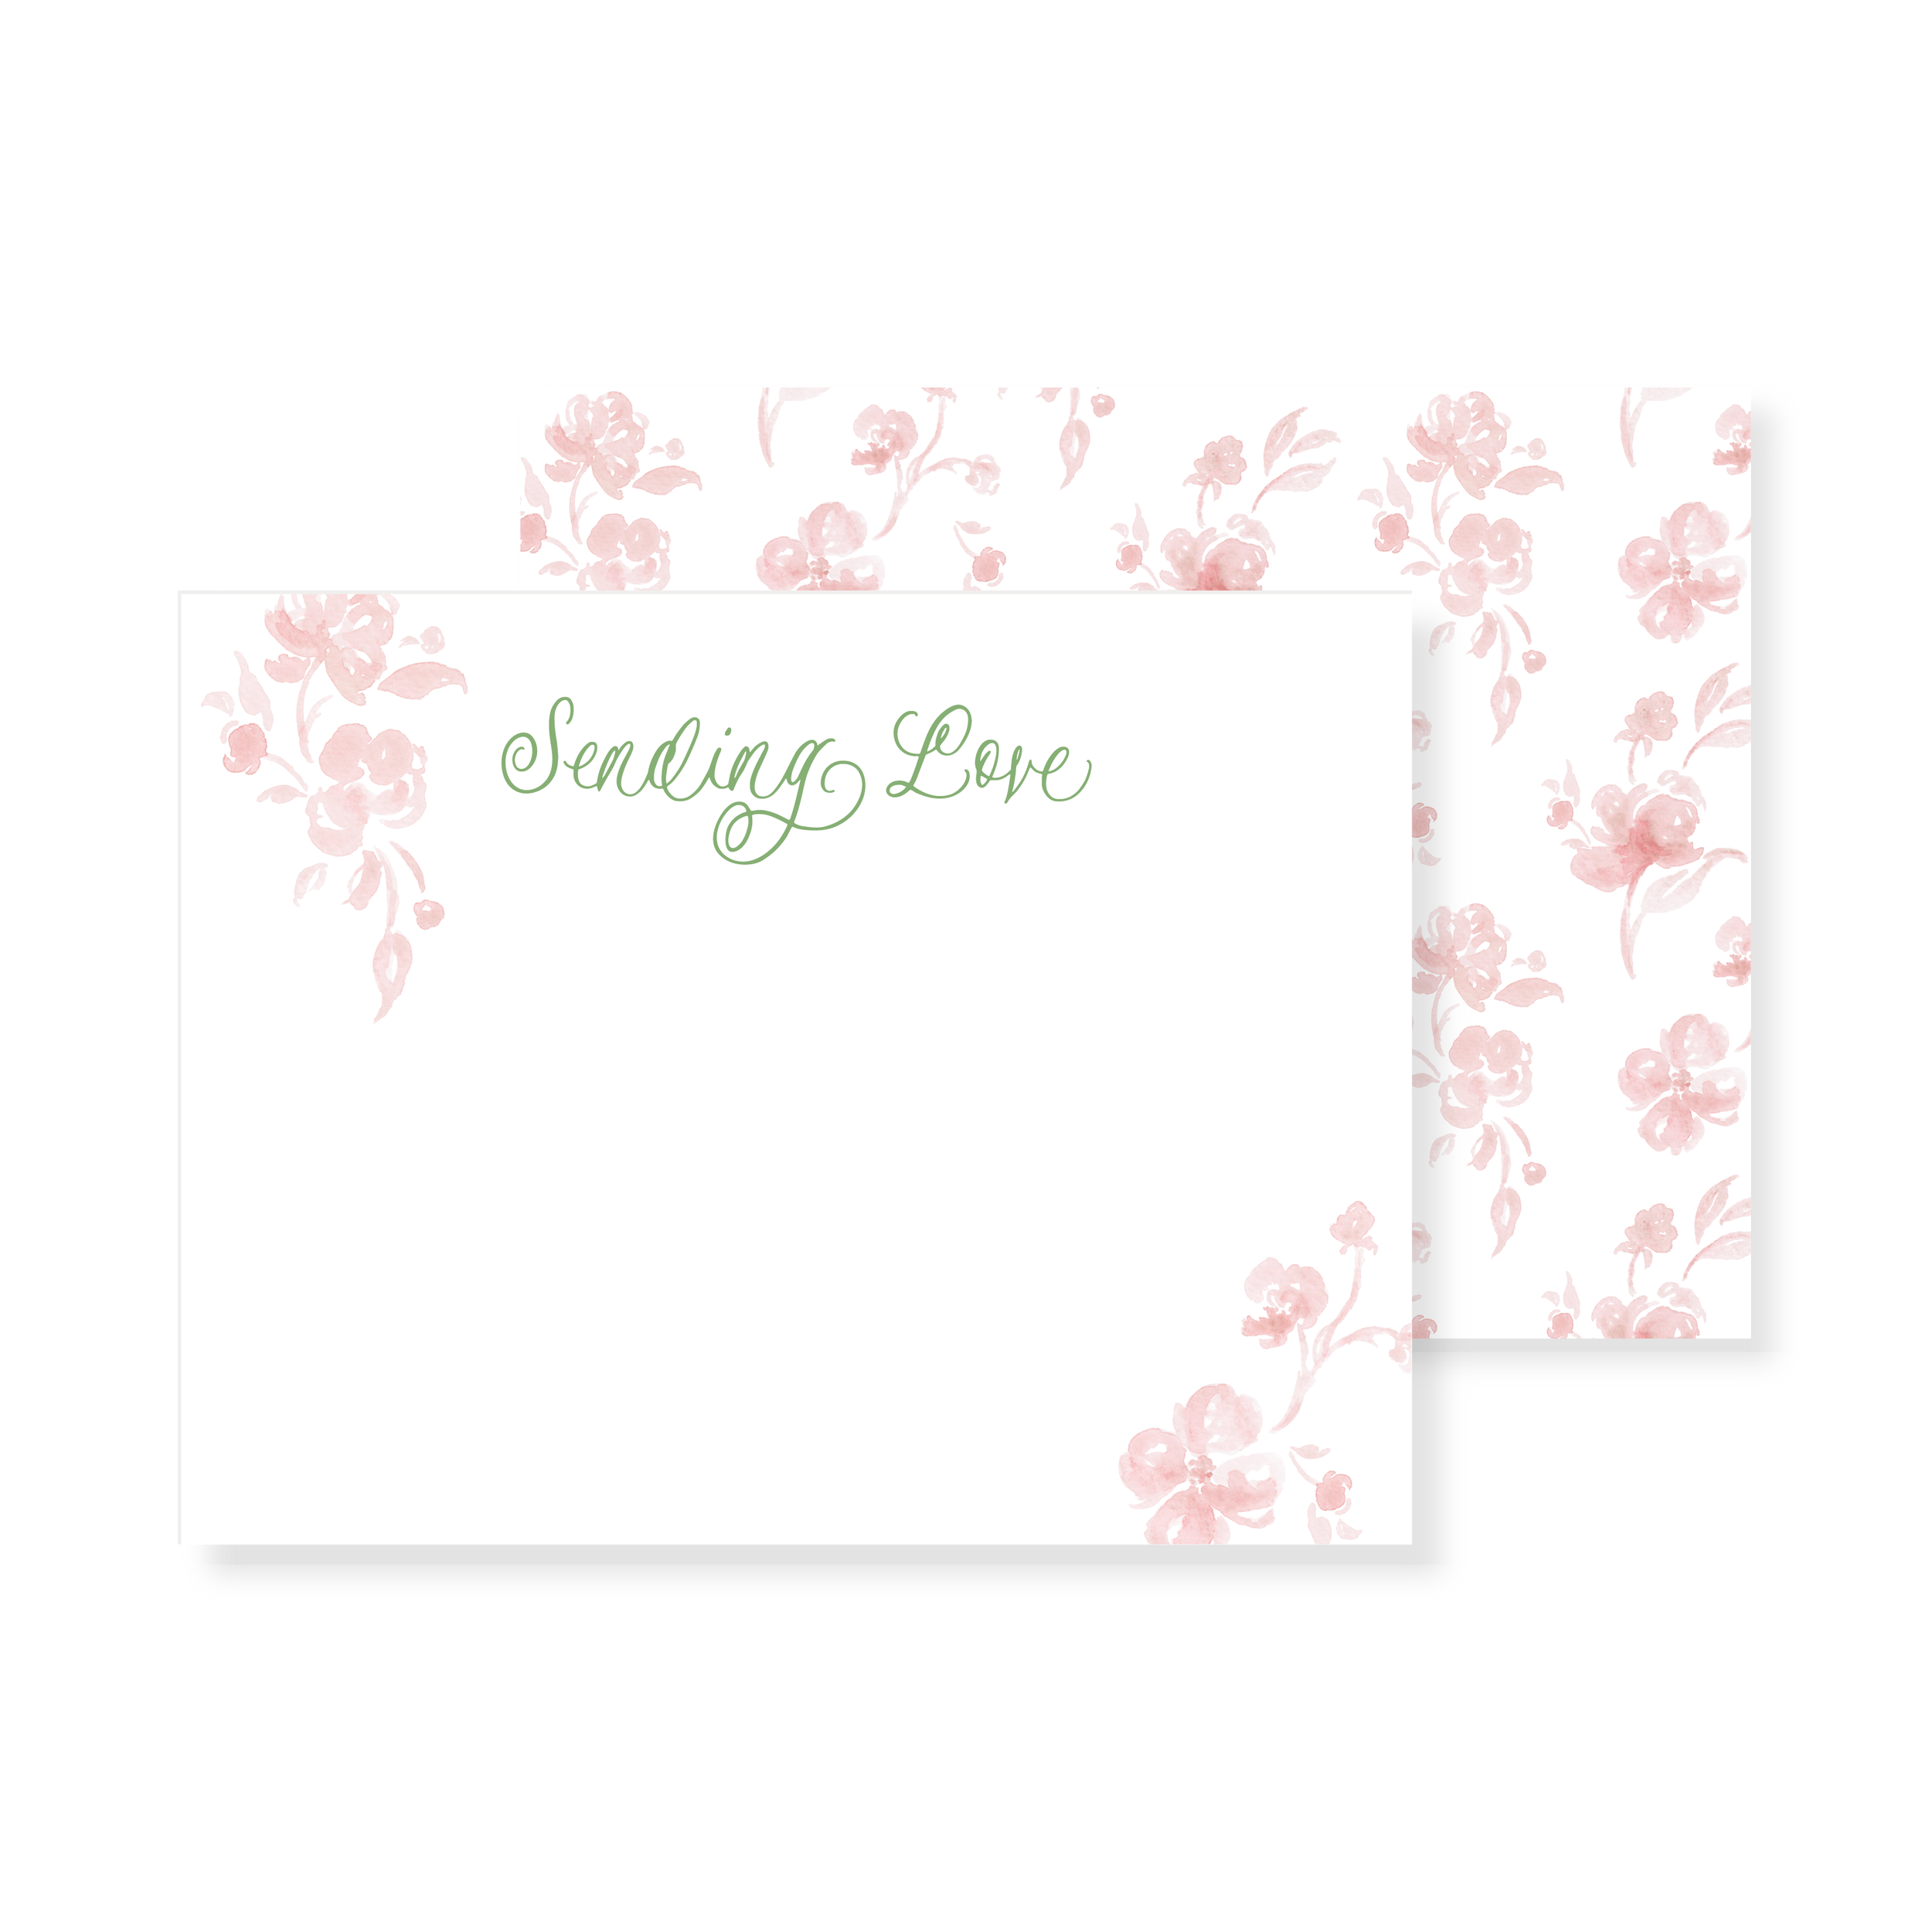 Pink Roses Thank You Cards Blank Floral Stationery Cards Pink Roses Stationery Cards Romantic Cards Blooming Pink Roses Stationery Set